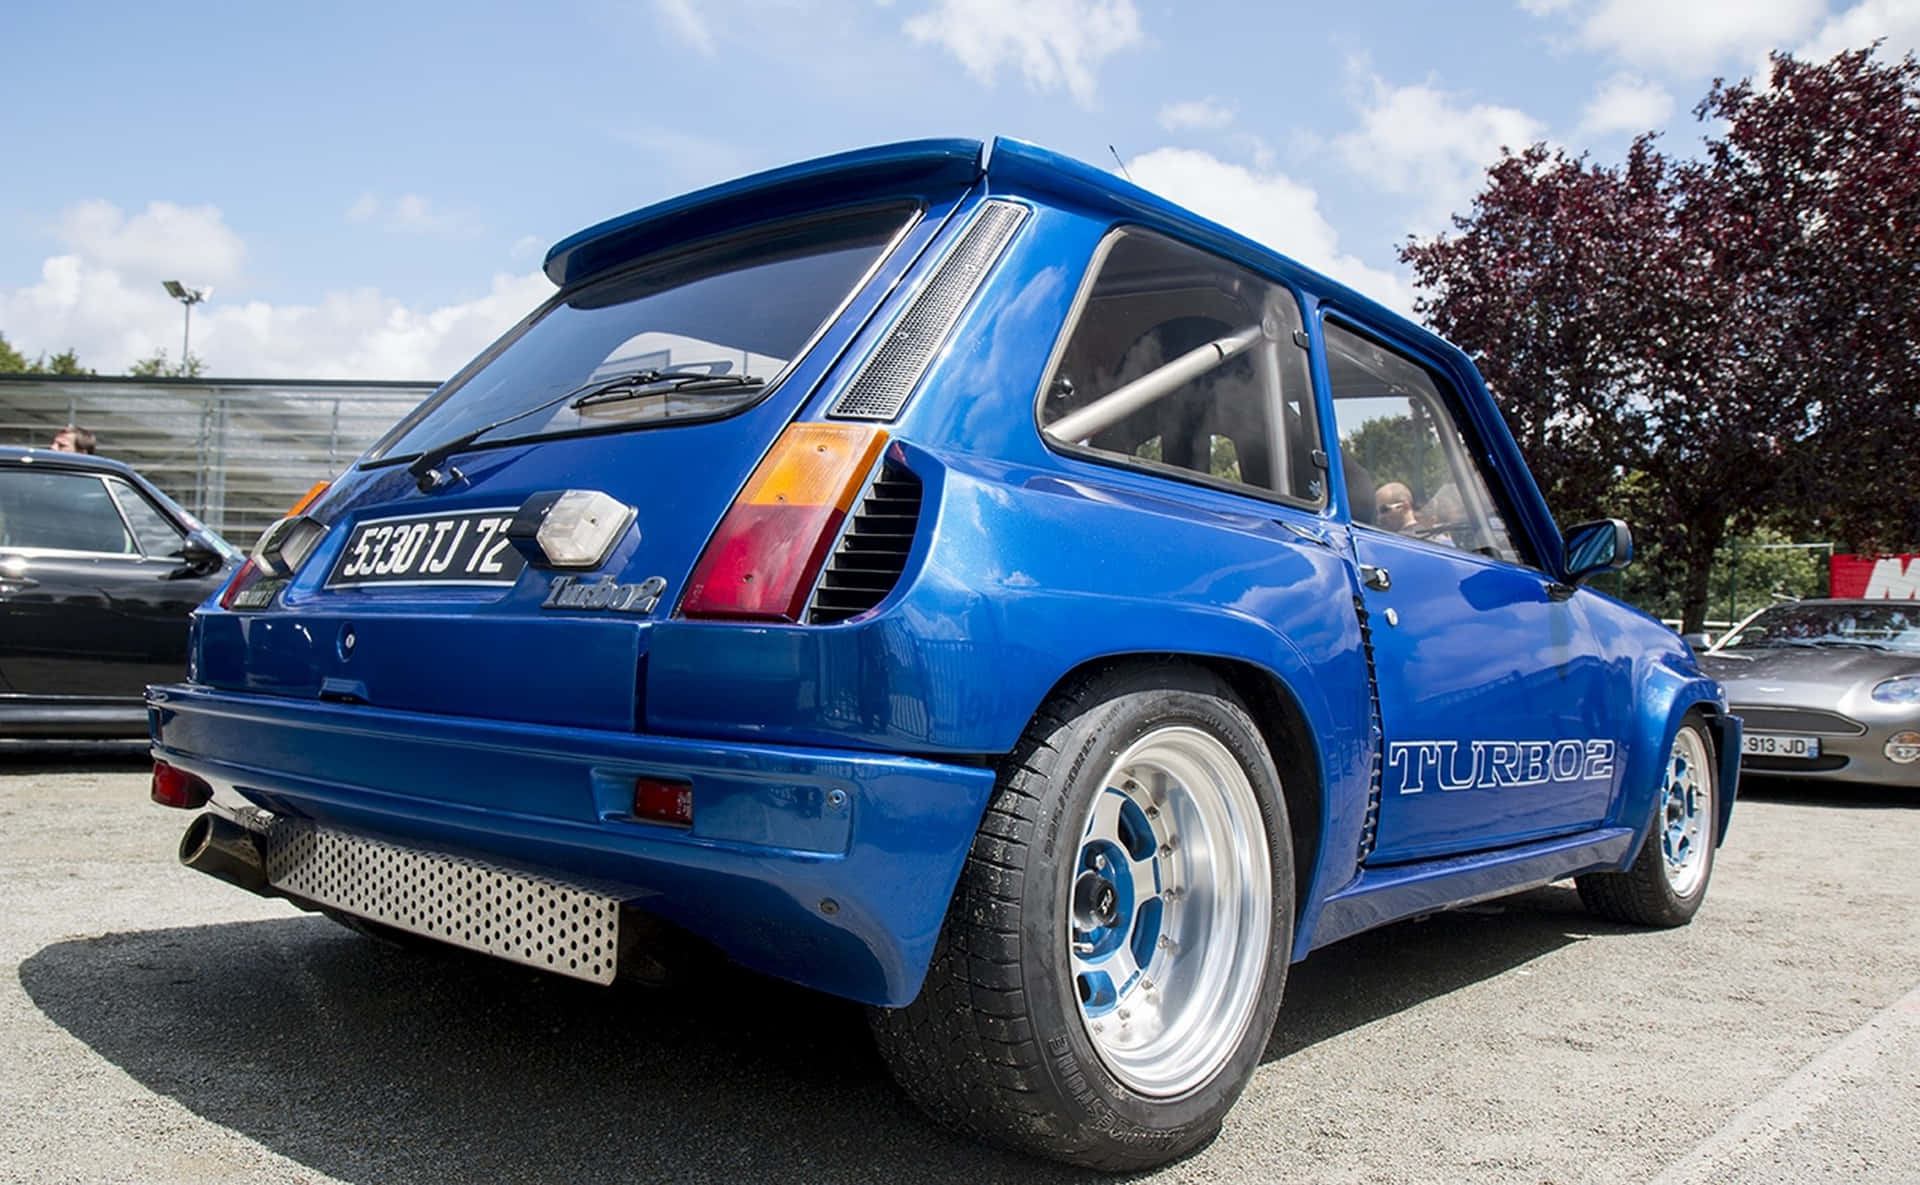 Classic Renault 5 Turbo in action Wallpaper